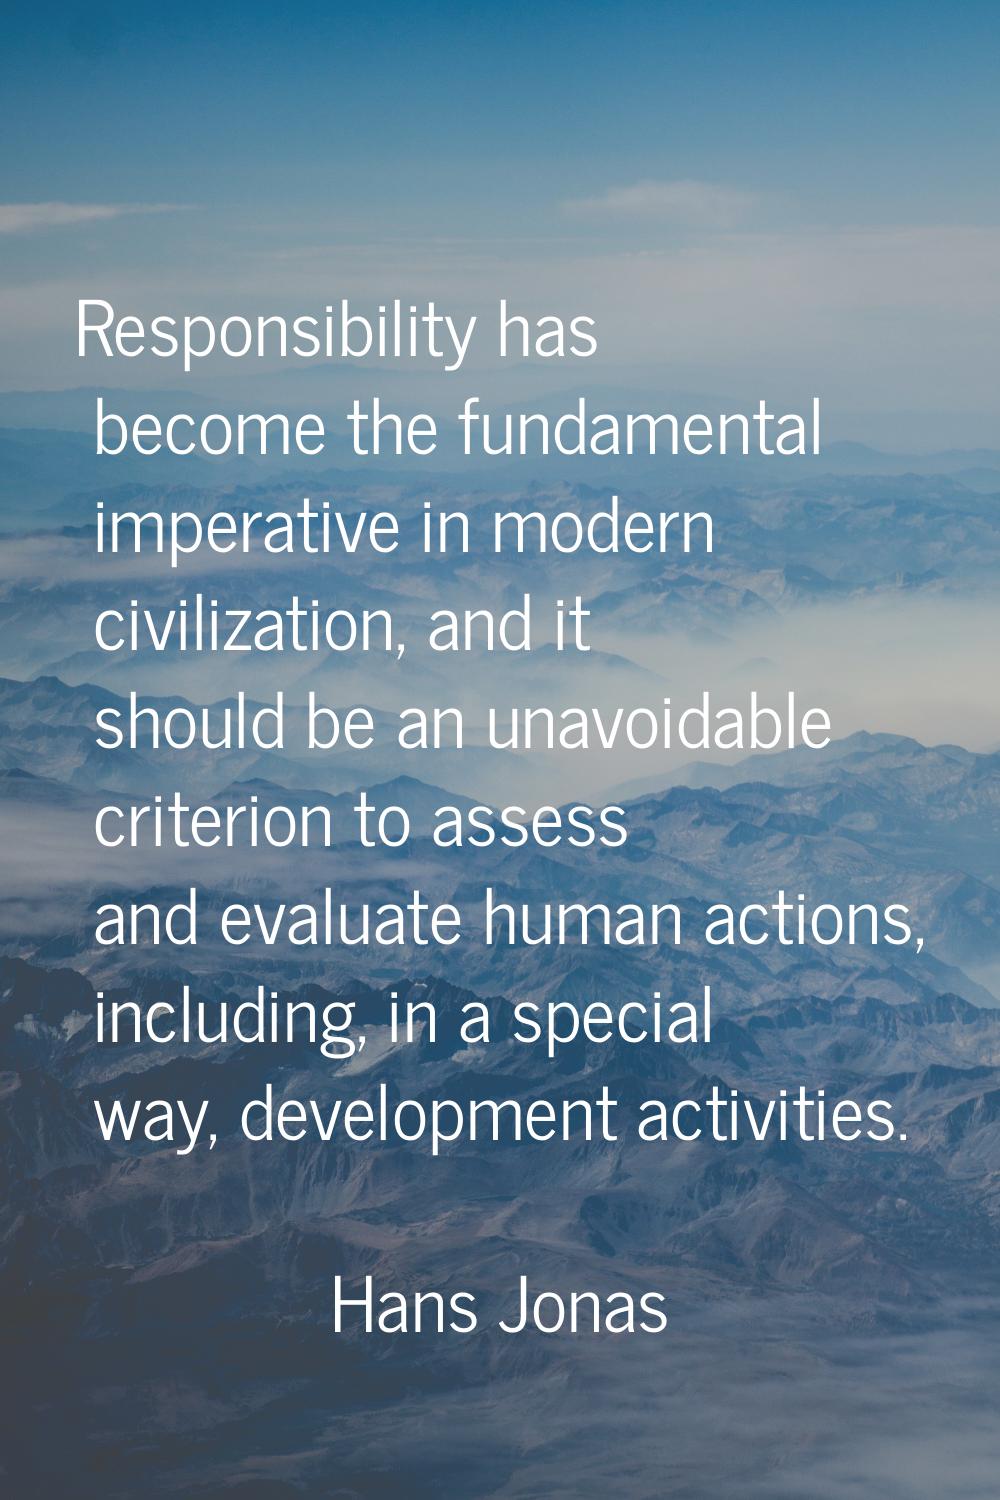 Responsibility has become the fundamental imperative in modern civilization, and it should be an un